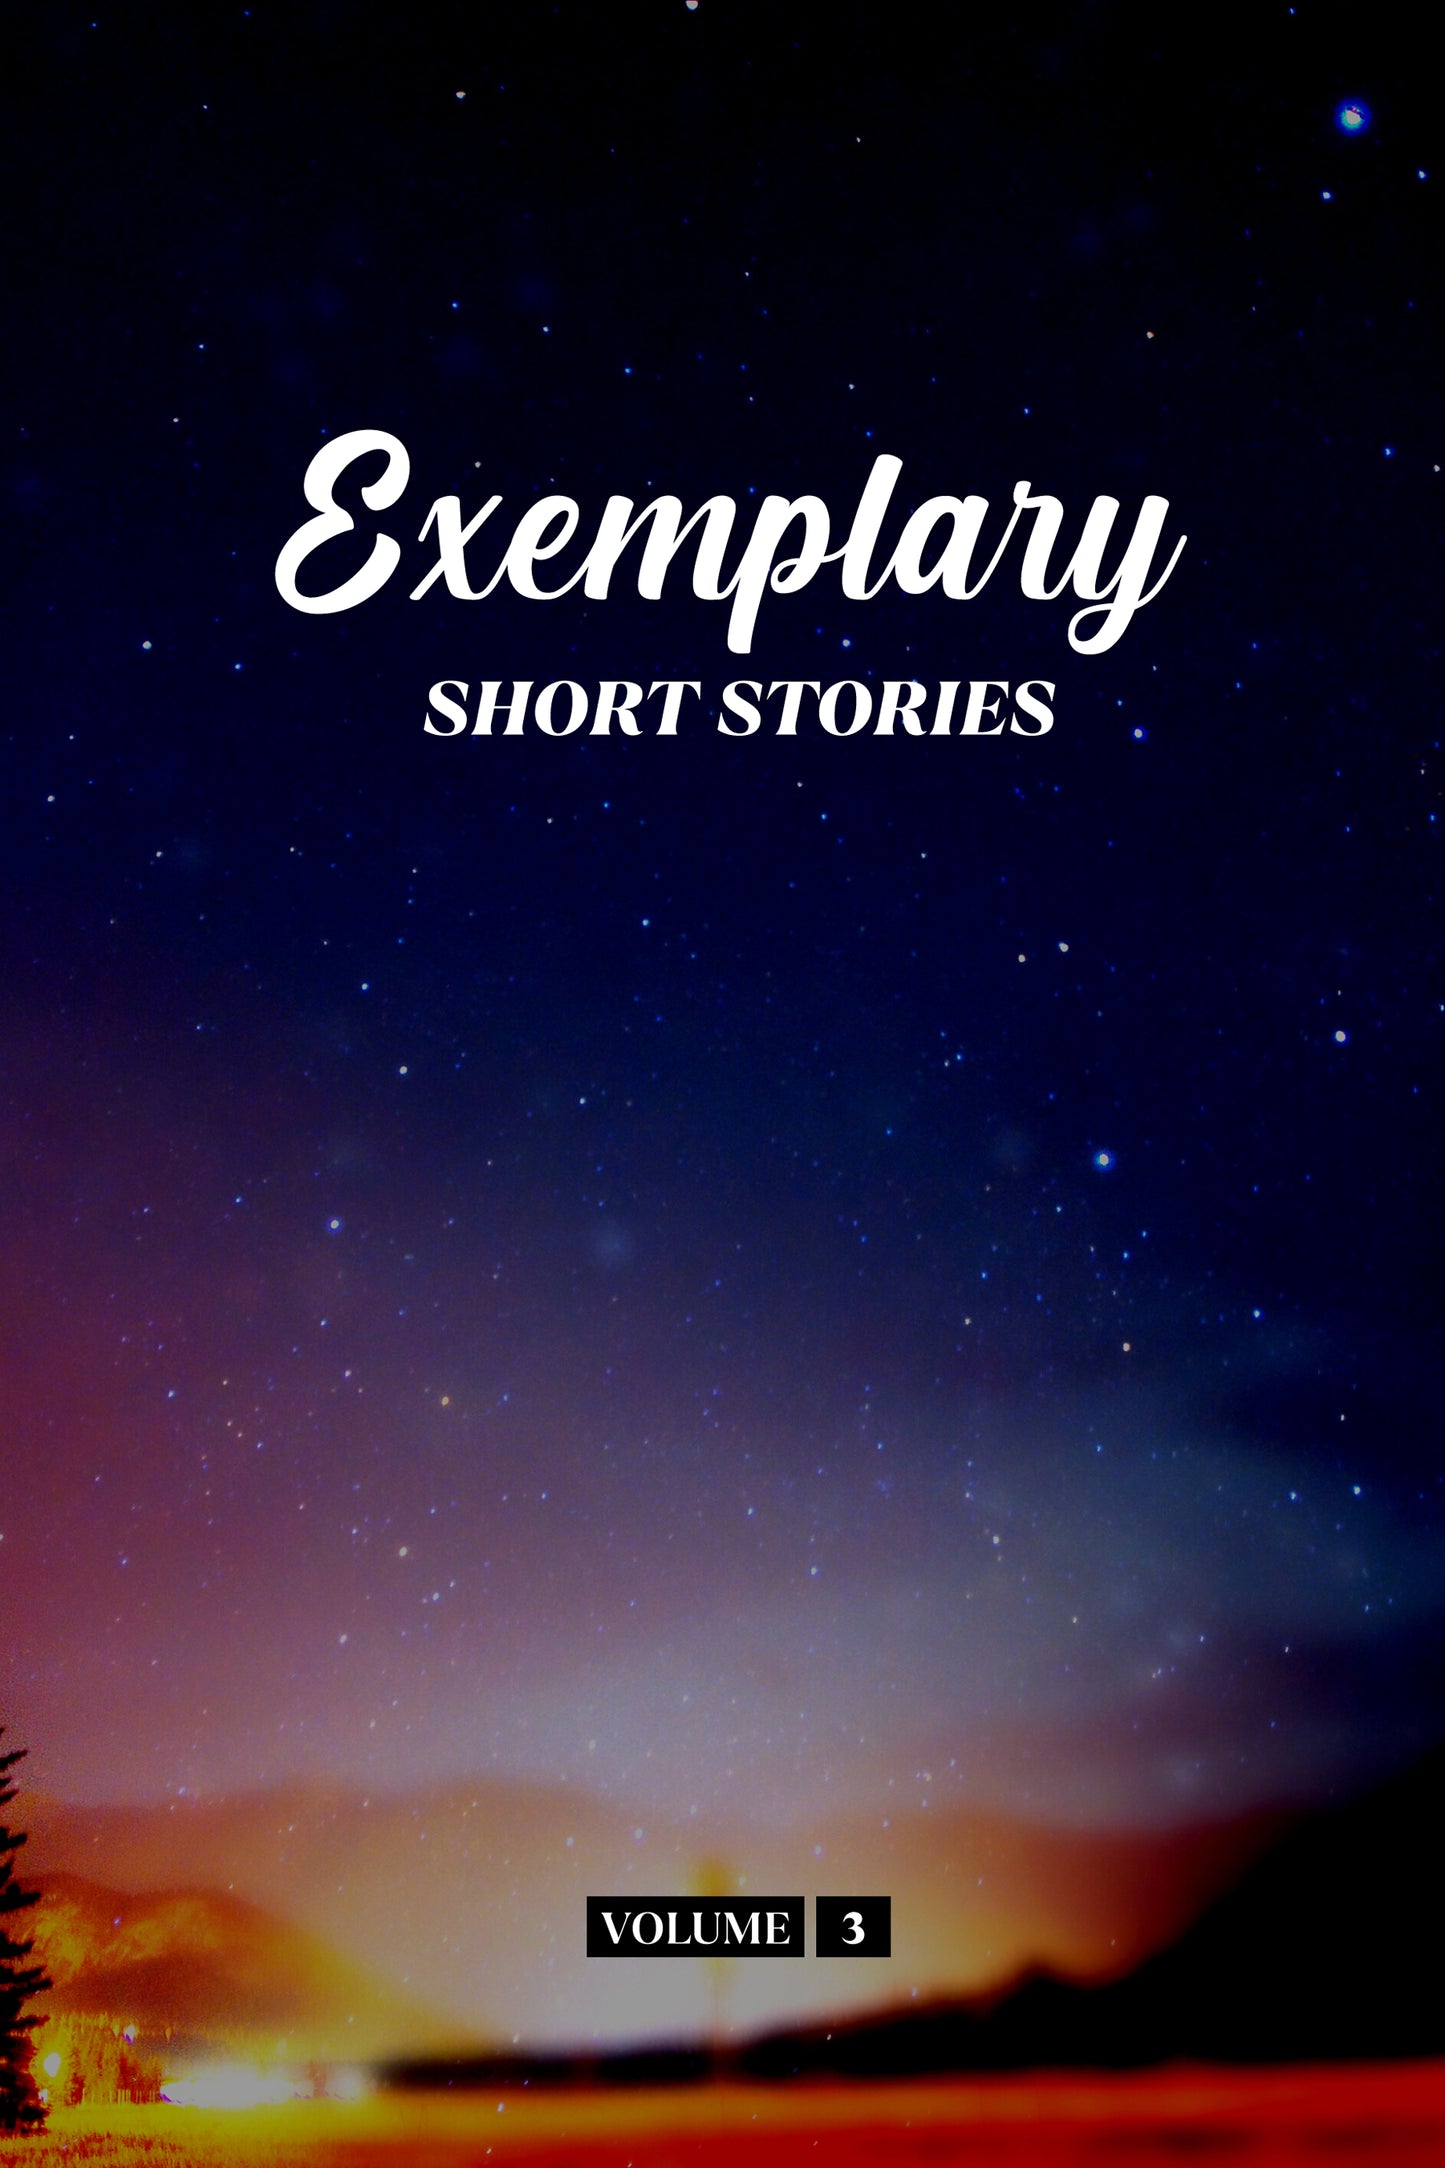 Exemplary Short Stories Volume 3 (Physical Book Pre-Order)